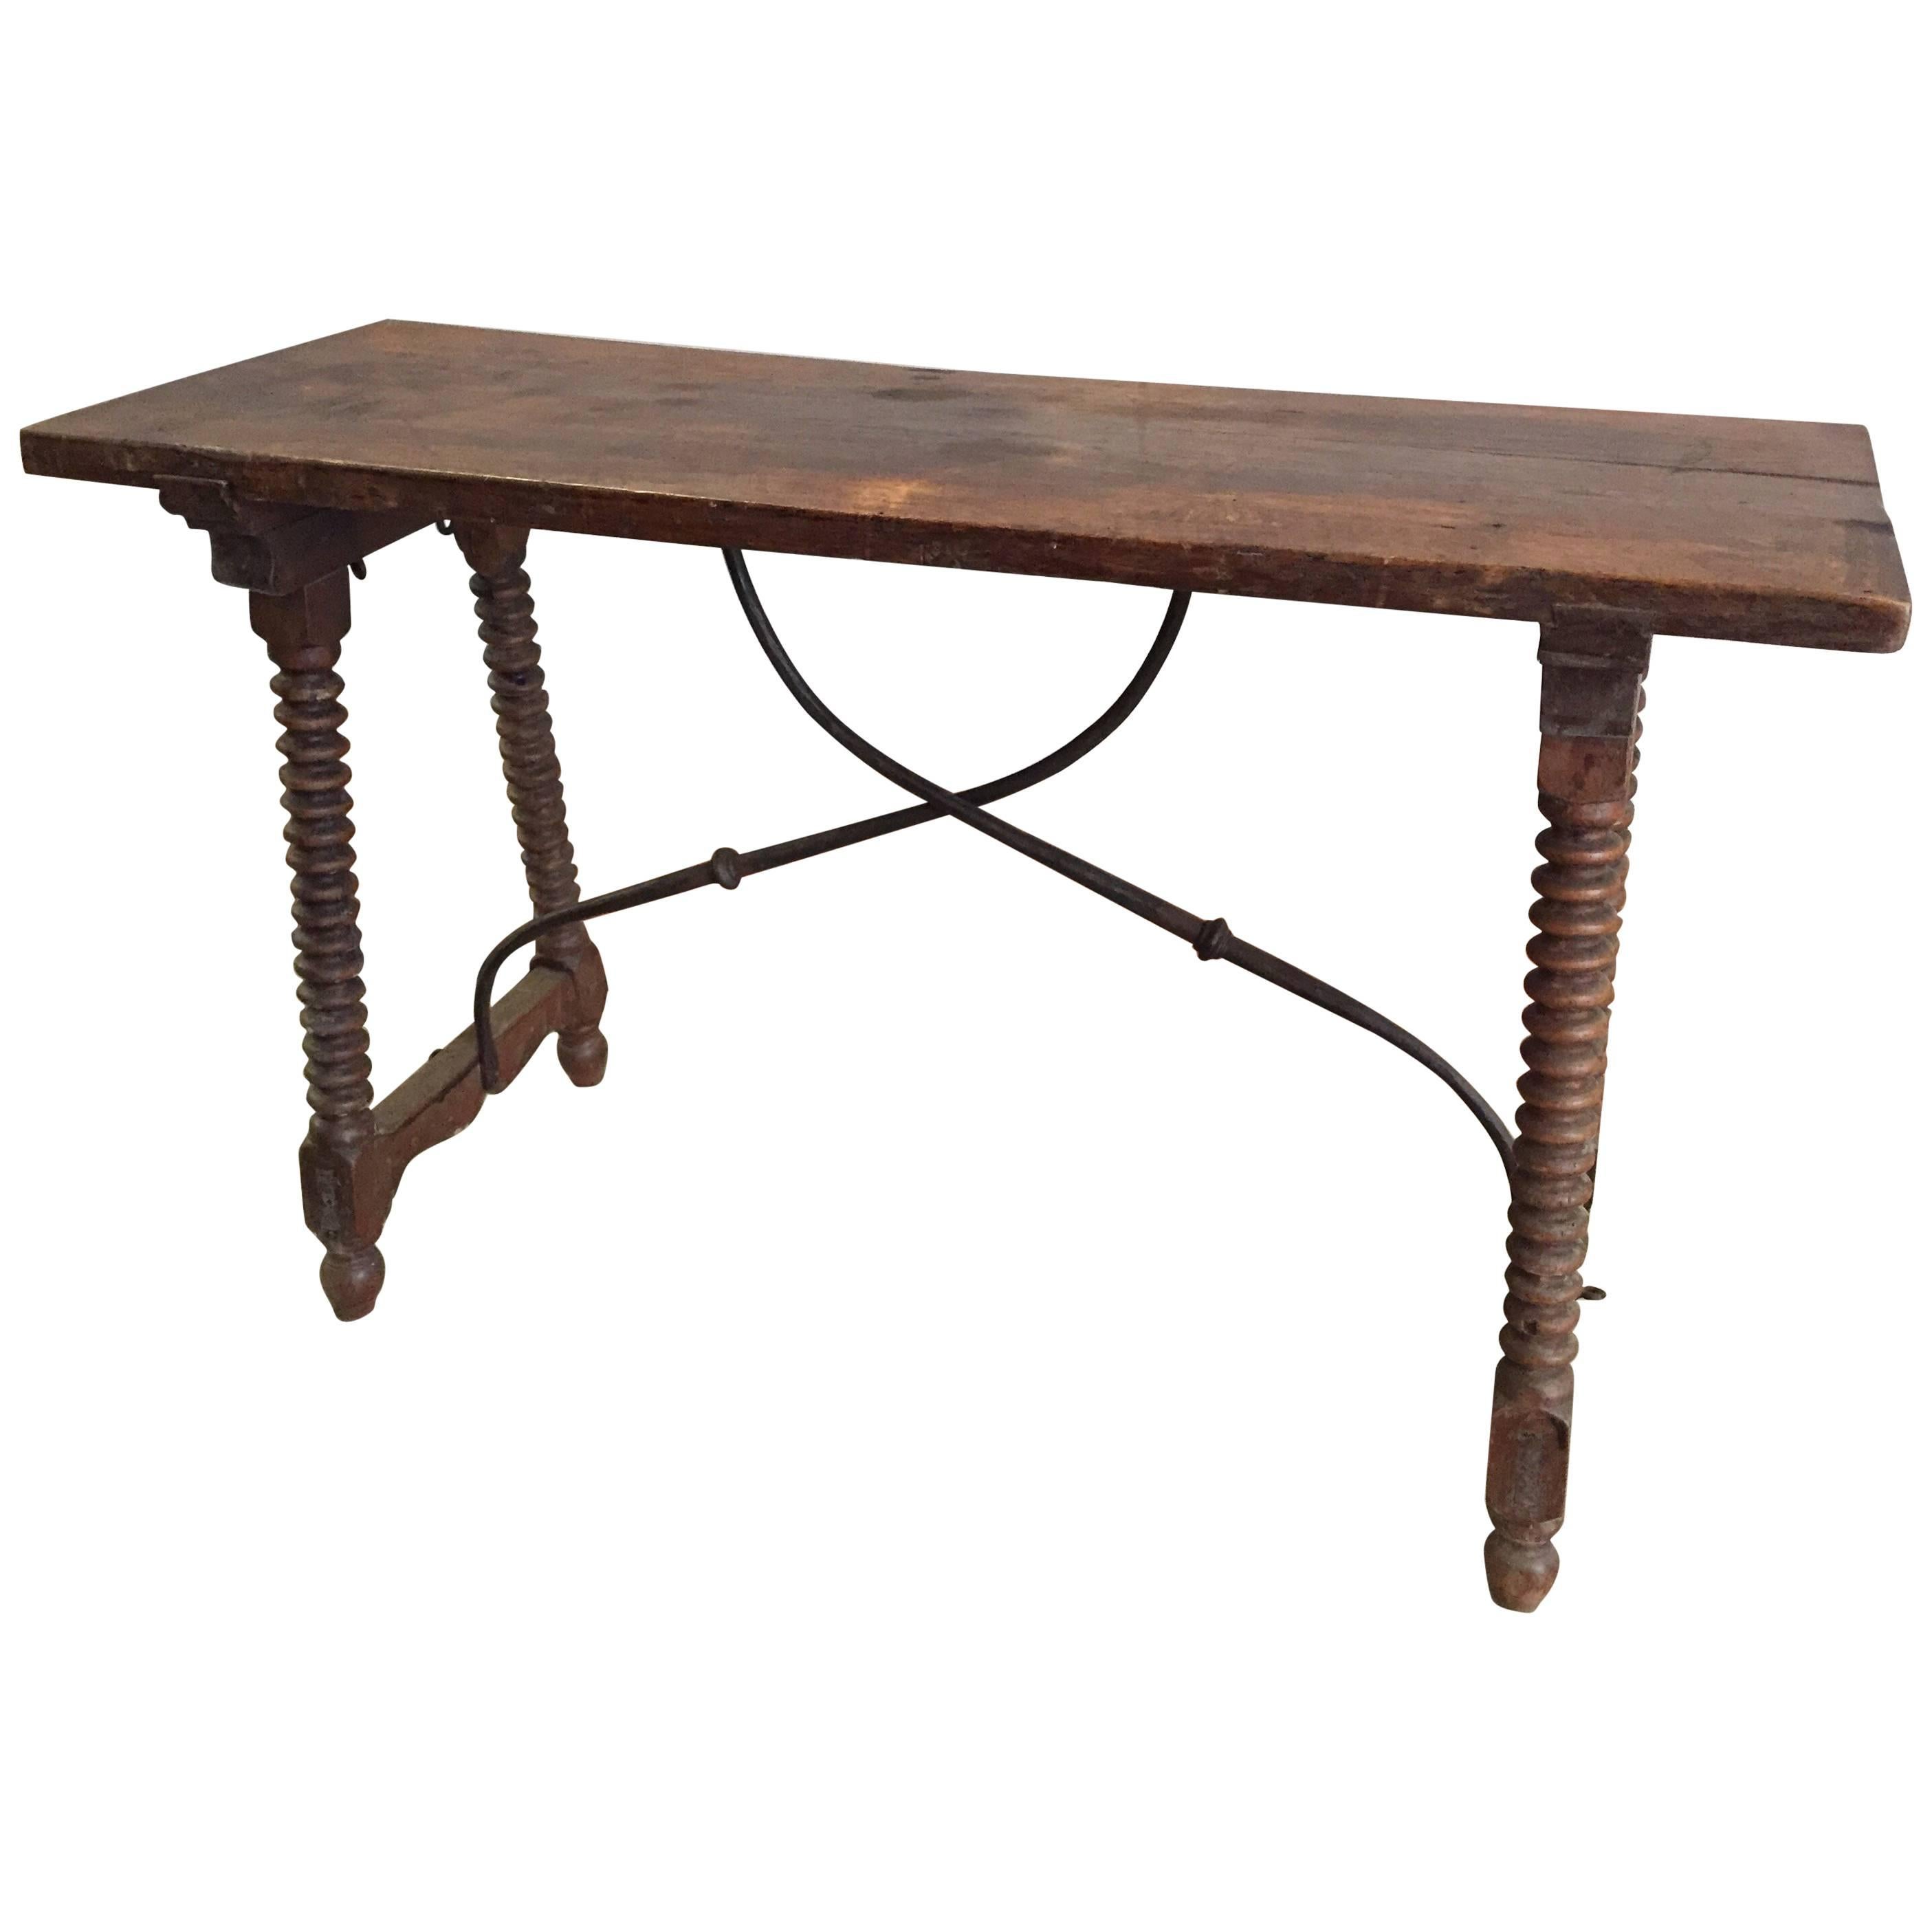 Spanish Table with Bobbin Legs and Iron Stretcher, 1900s